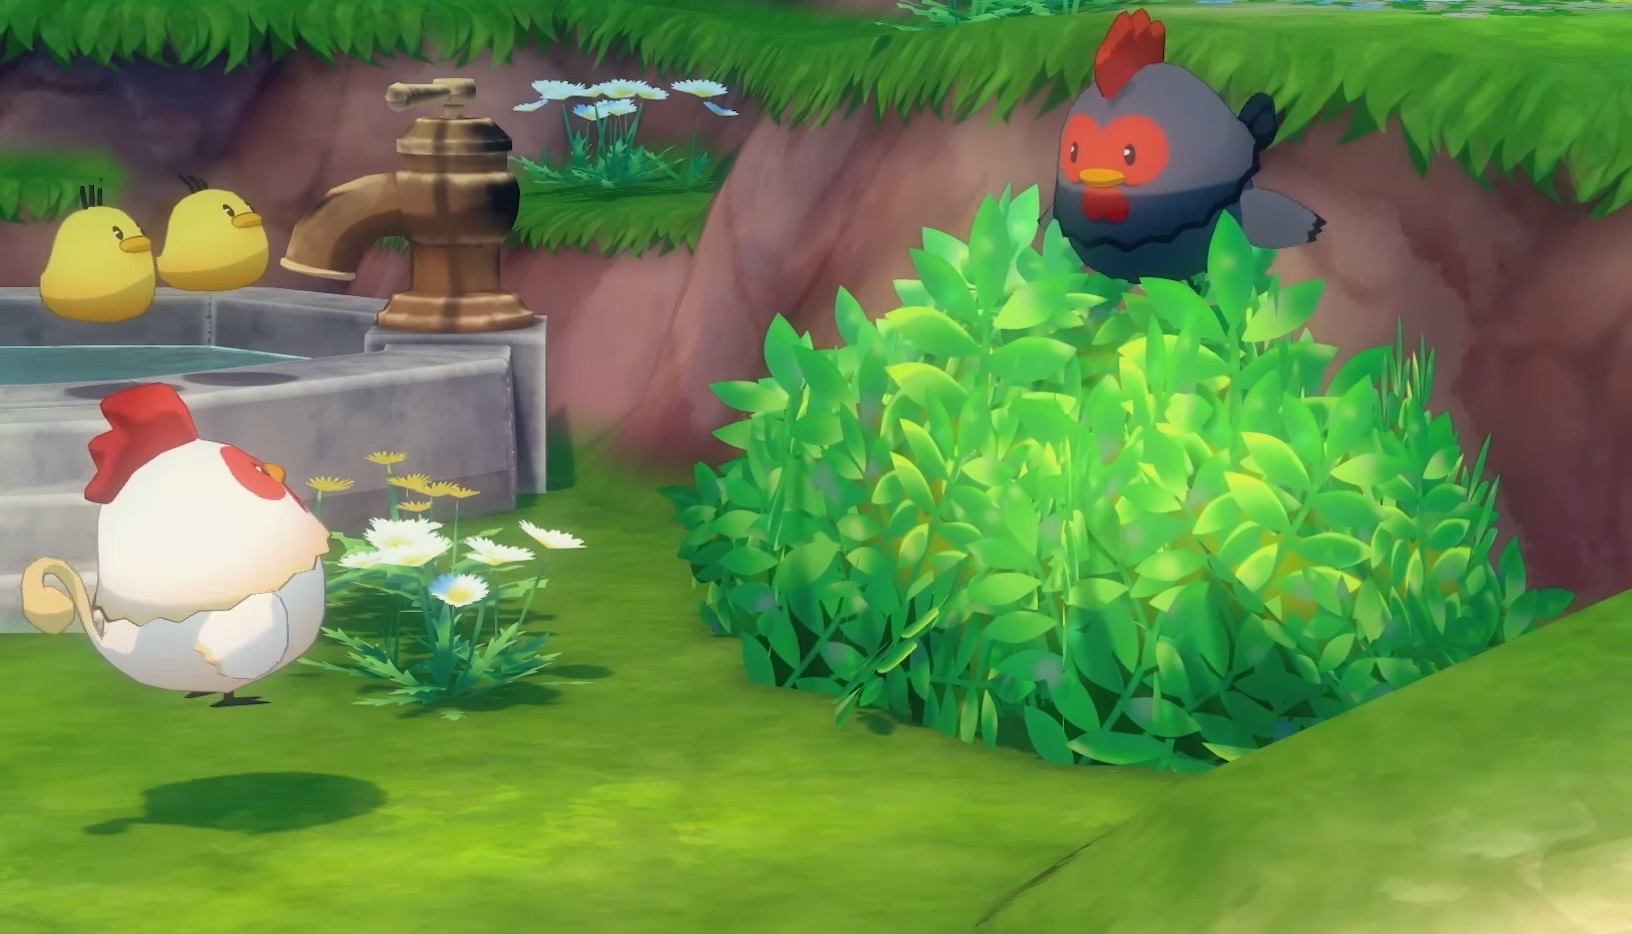 Story of Seasons new game teaser - a black chicken pops out of a bush to surprise a white chicken and two yellow chicks playing beside a water fountain